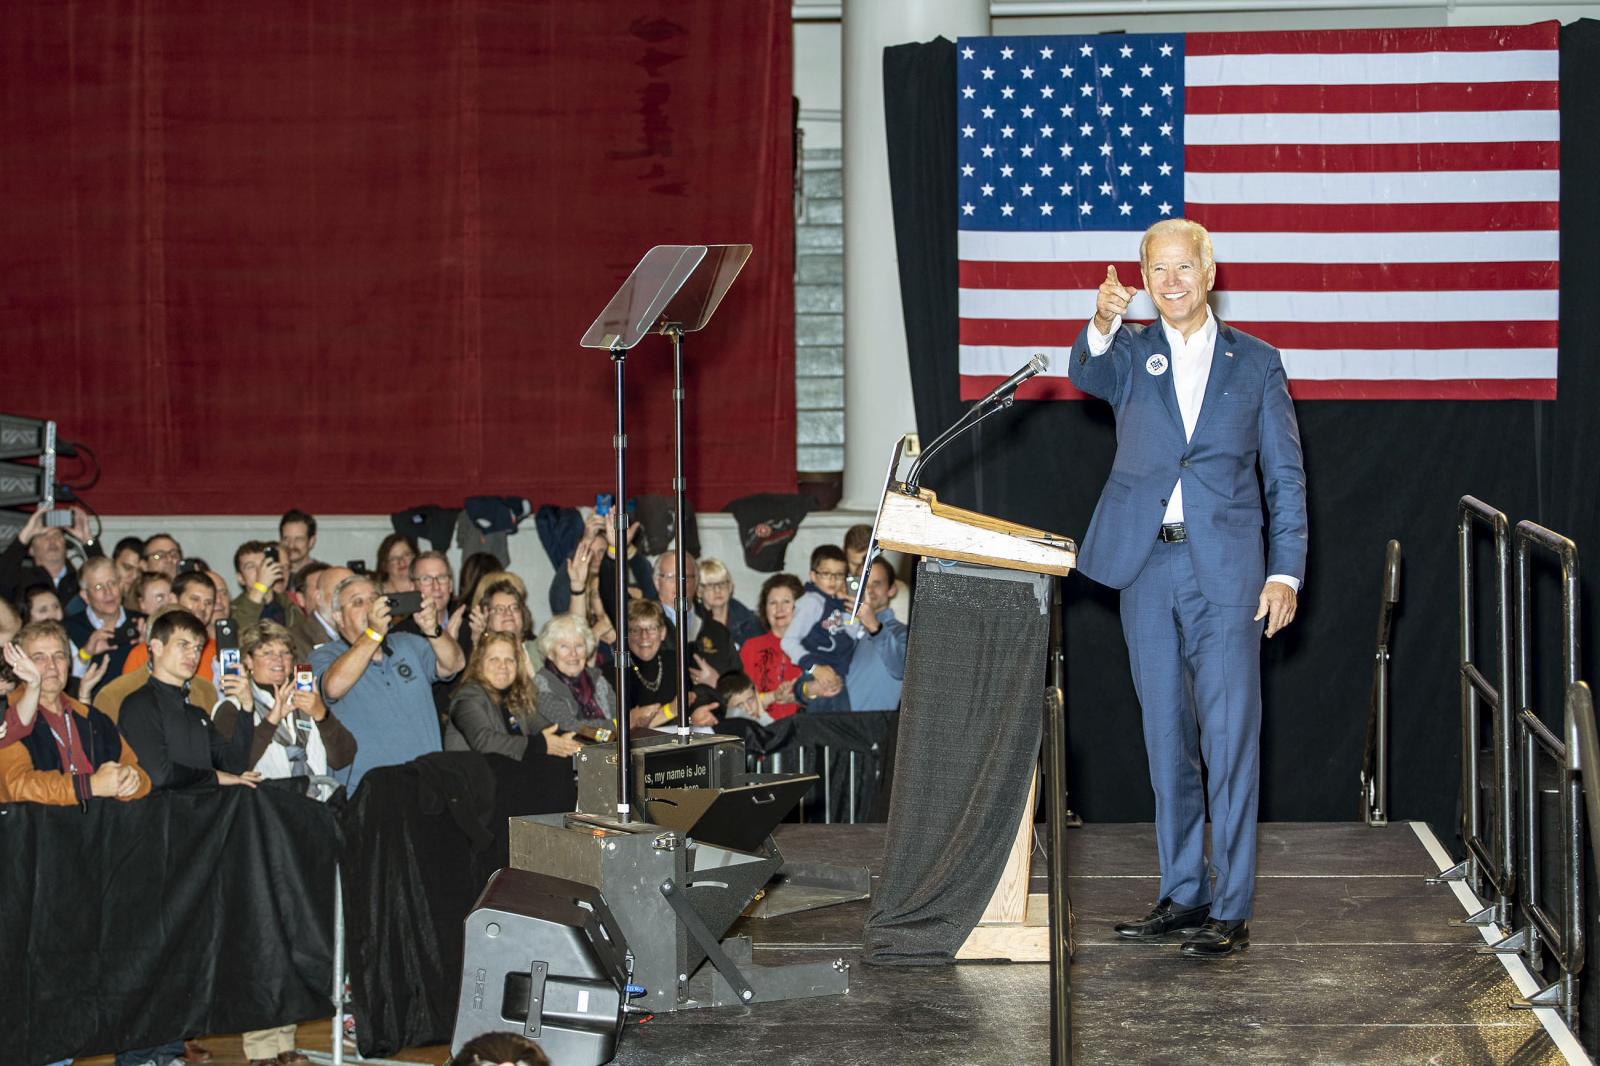 Image from Politics - Former U.S. Vice President Joe Biden campaigns with...